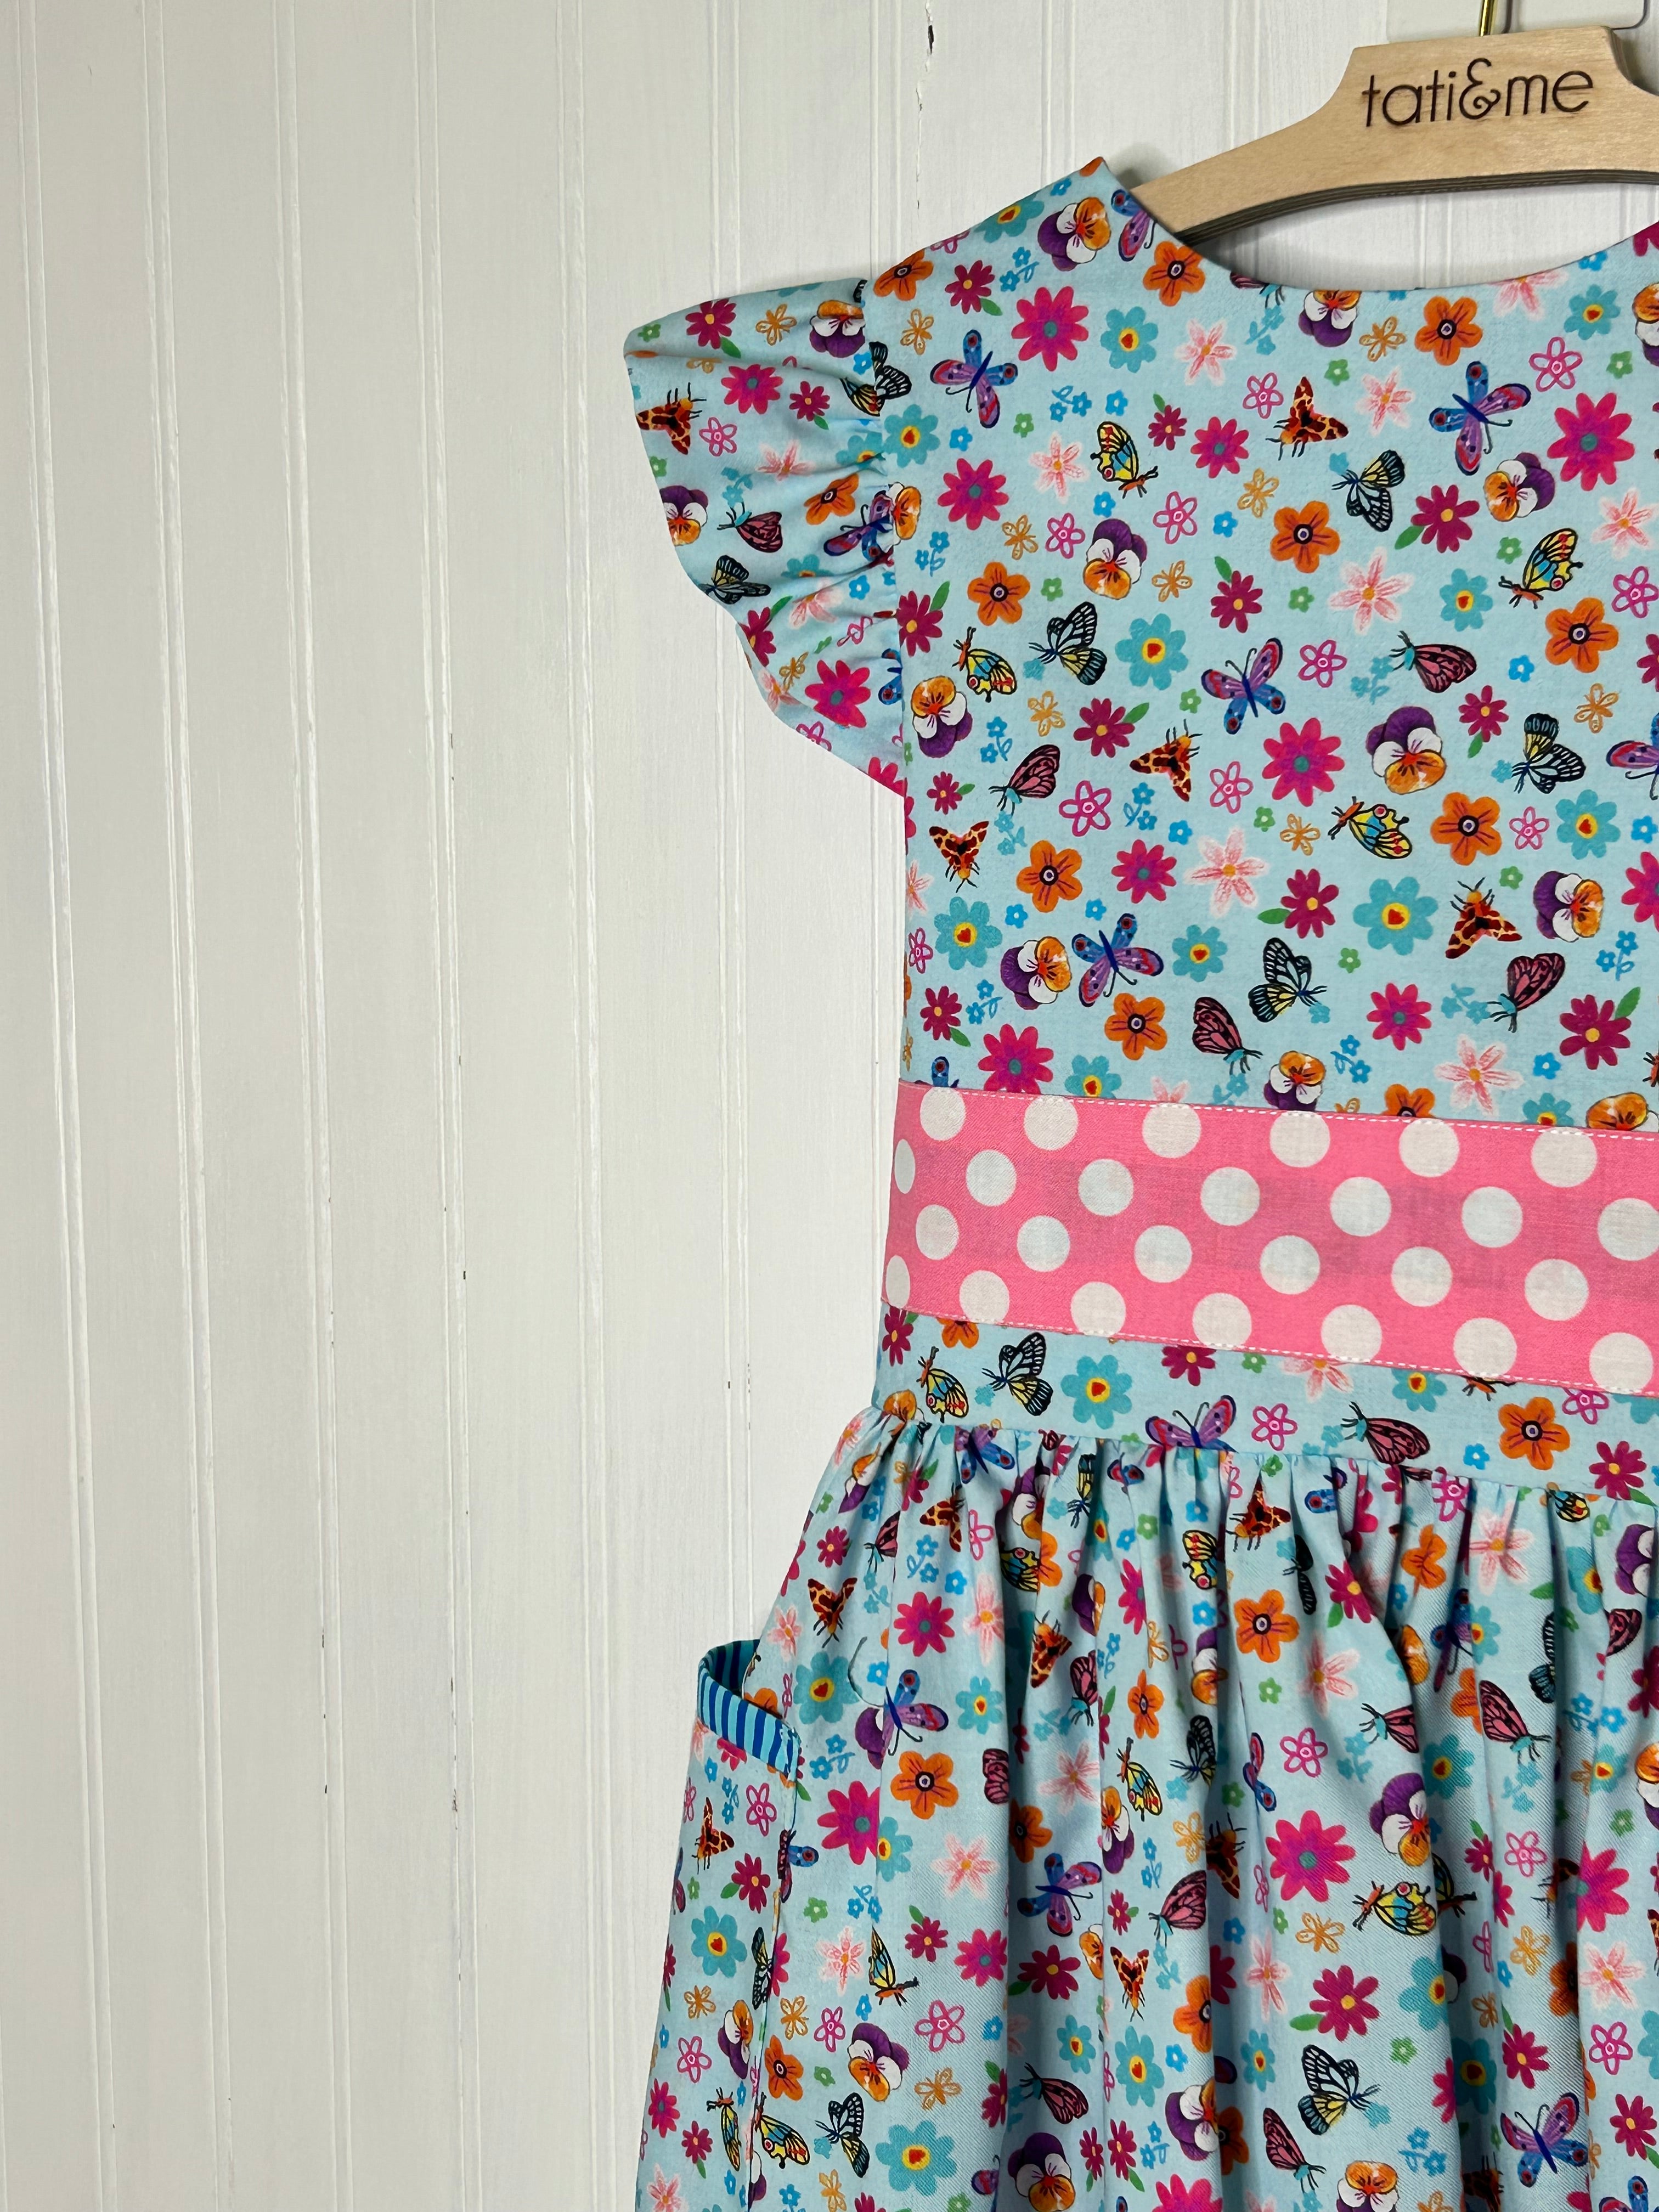 Dainty Floral Pocket Dress- 5 year old